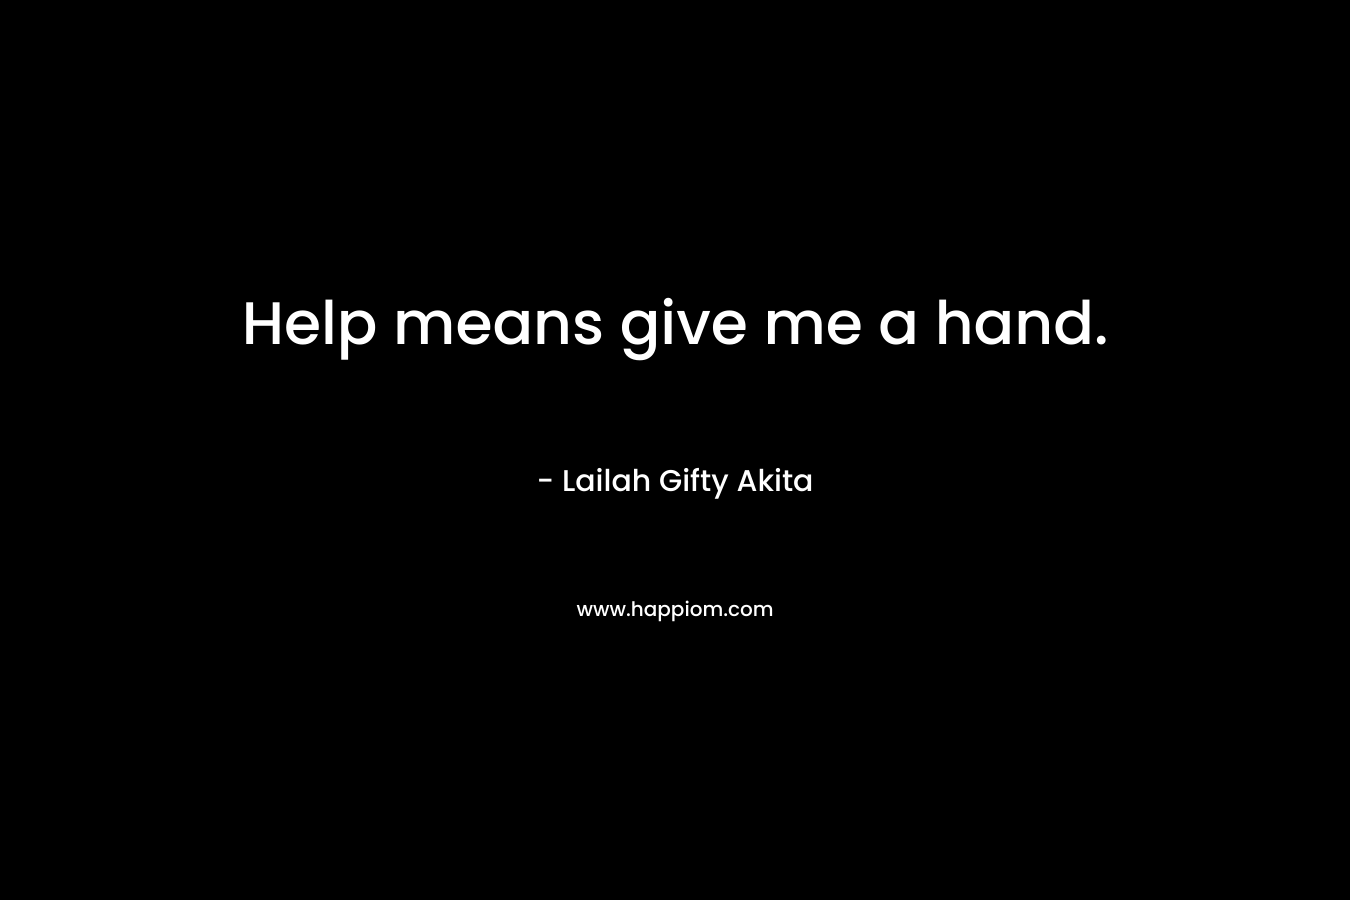 Help means give me a hand. – Lailah Gifty Akita